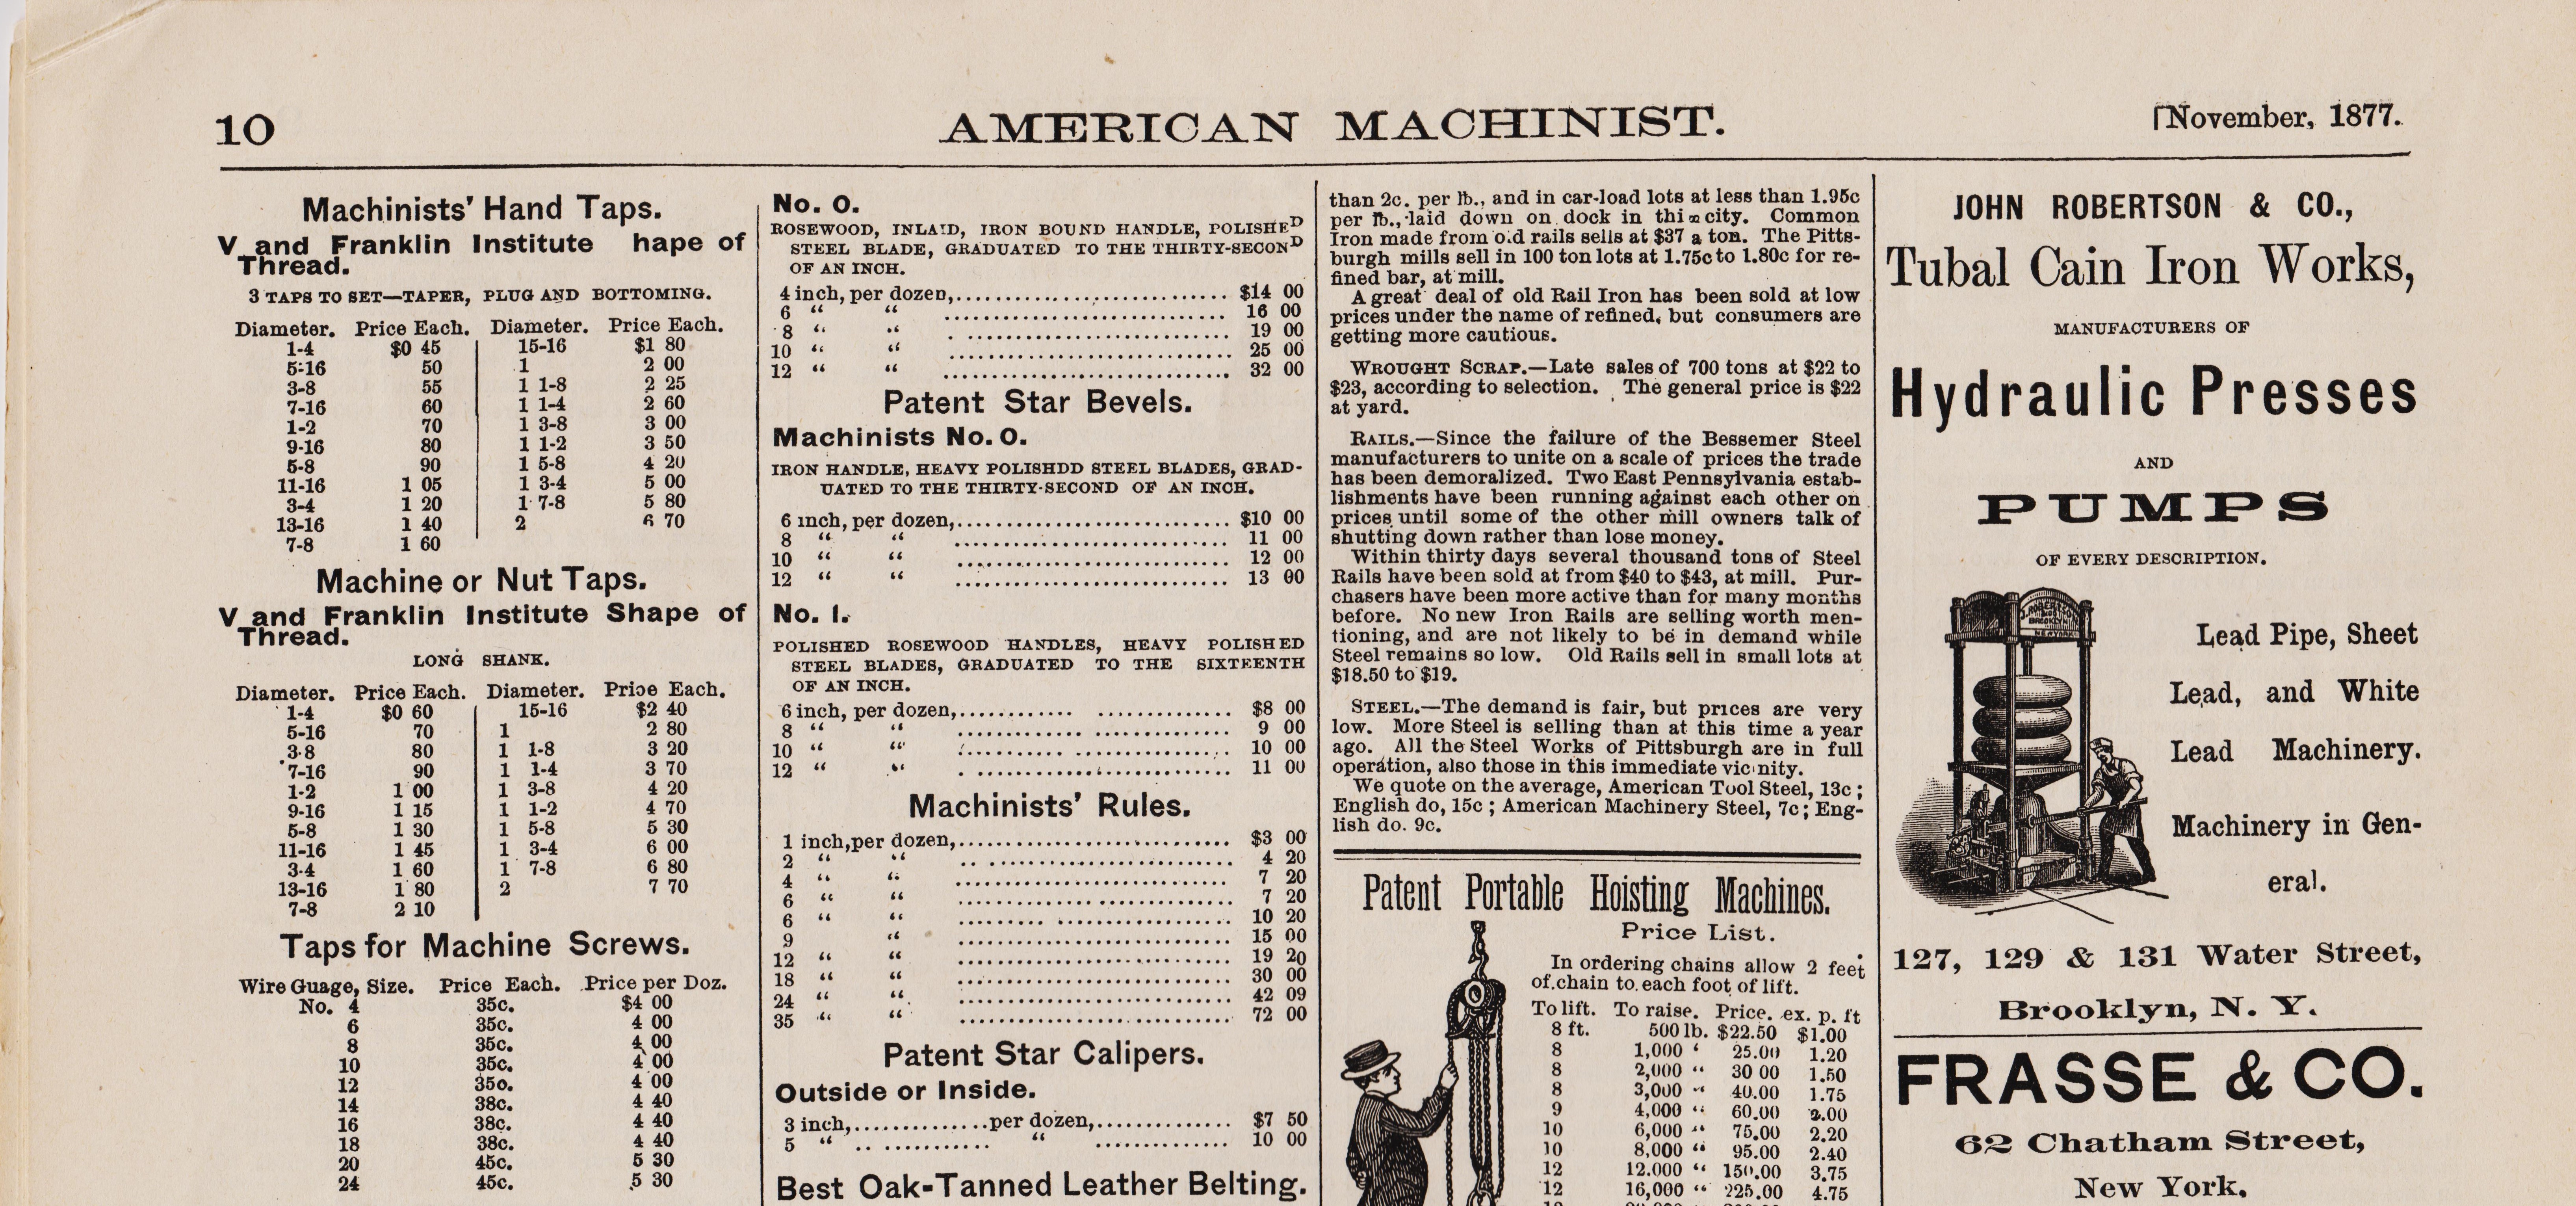 https://antiquemachinery.com/images-2020/American_Machinist-March-15-1894-pg-17-mid-Ads.jpg